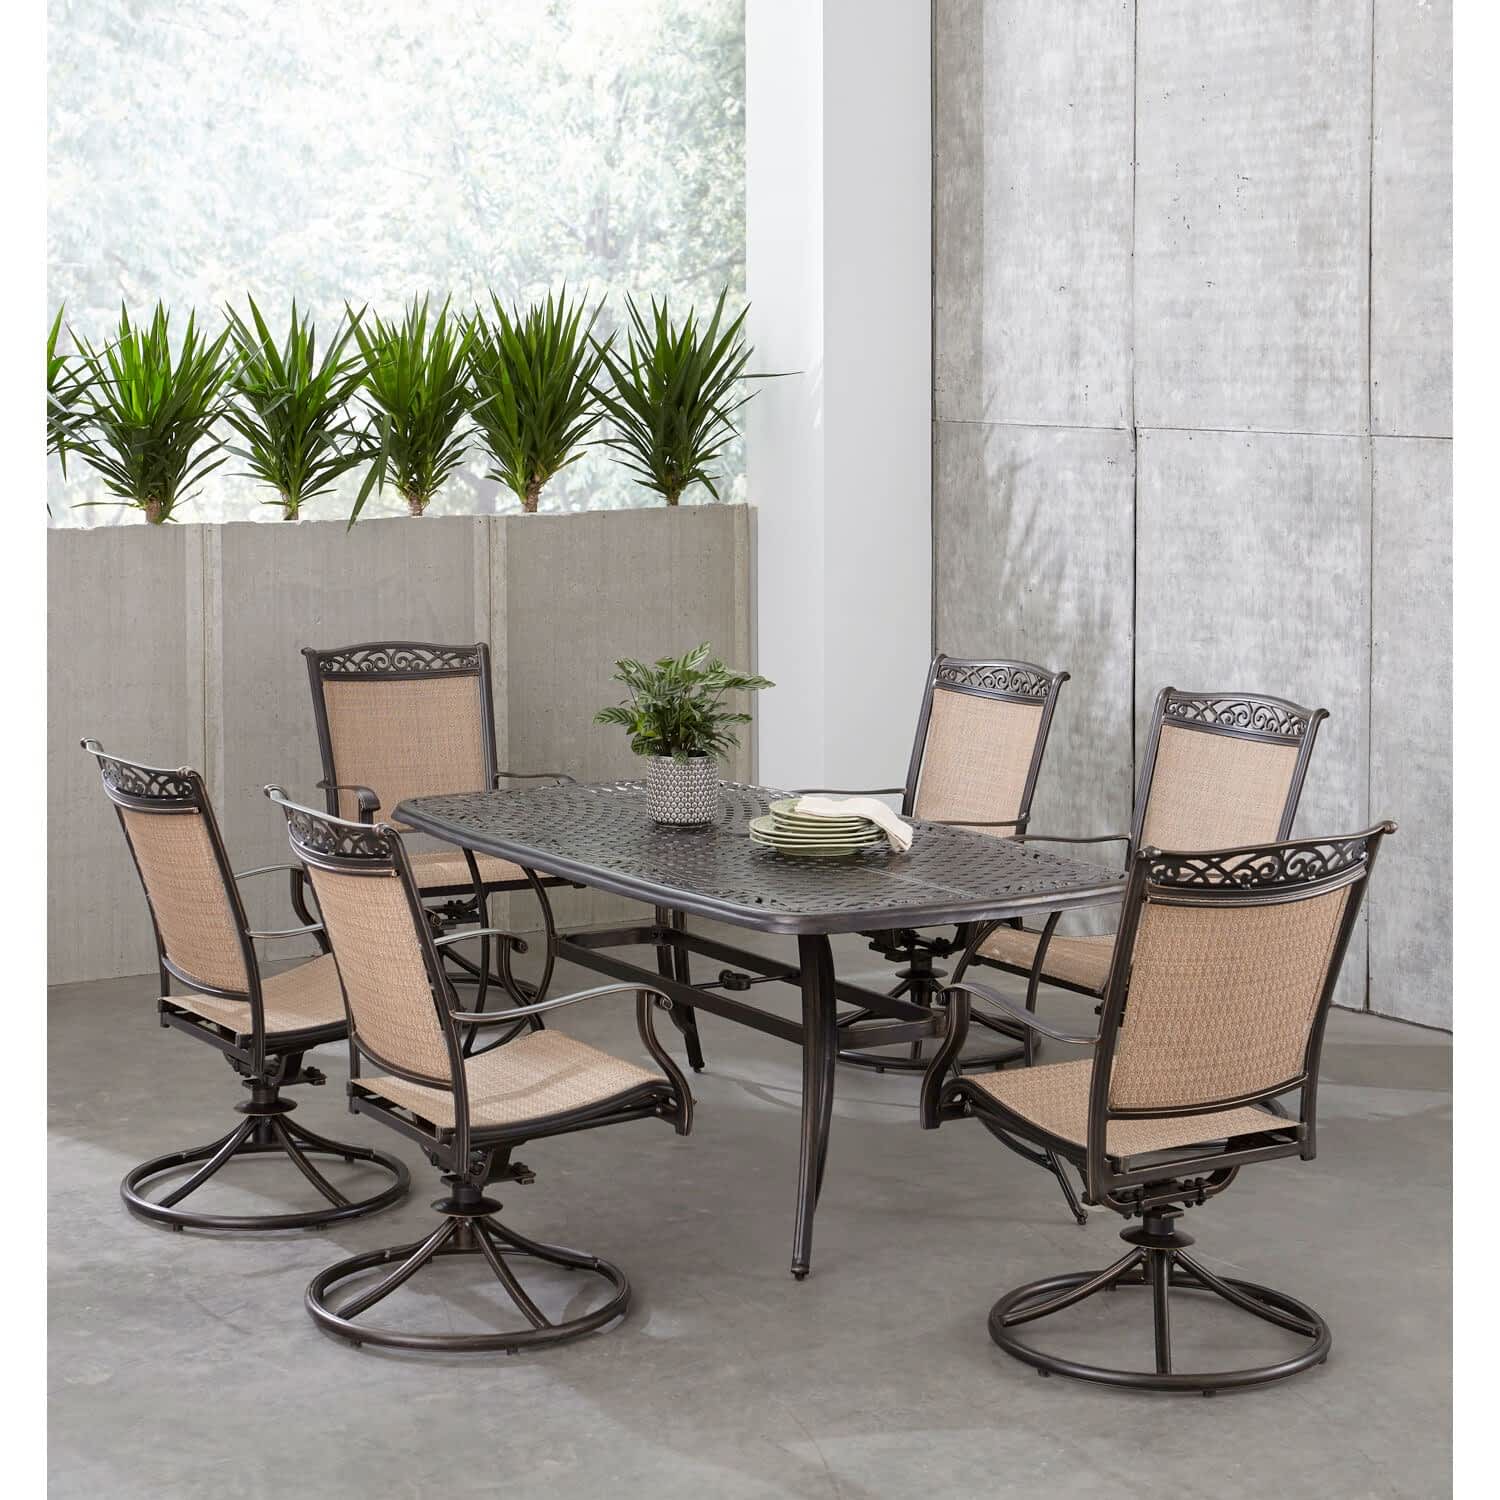 Hanover-Fontana-series-7-piece-patio-dining-set-with-rectangular-table-and-six-swivels-outdoor-set